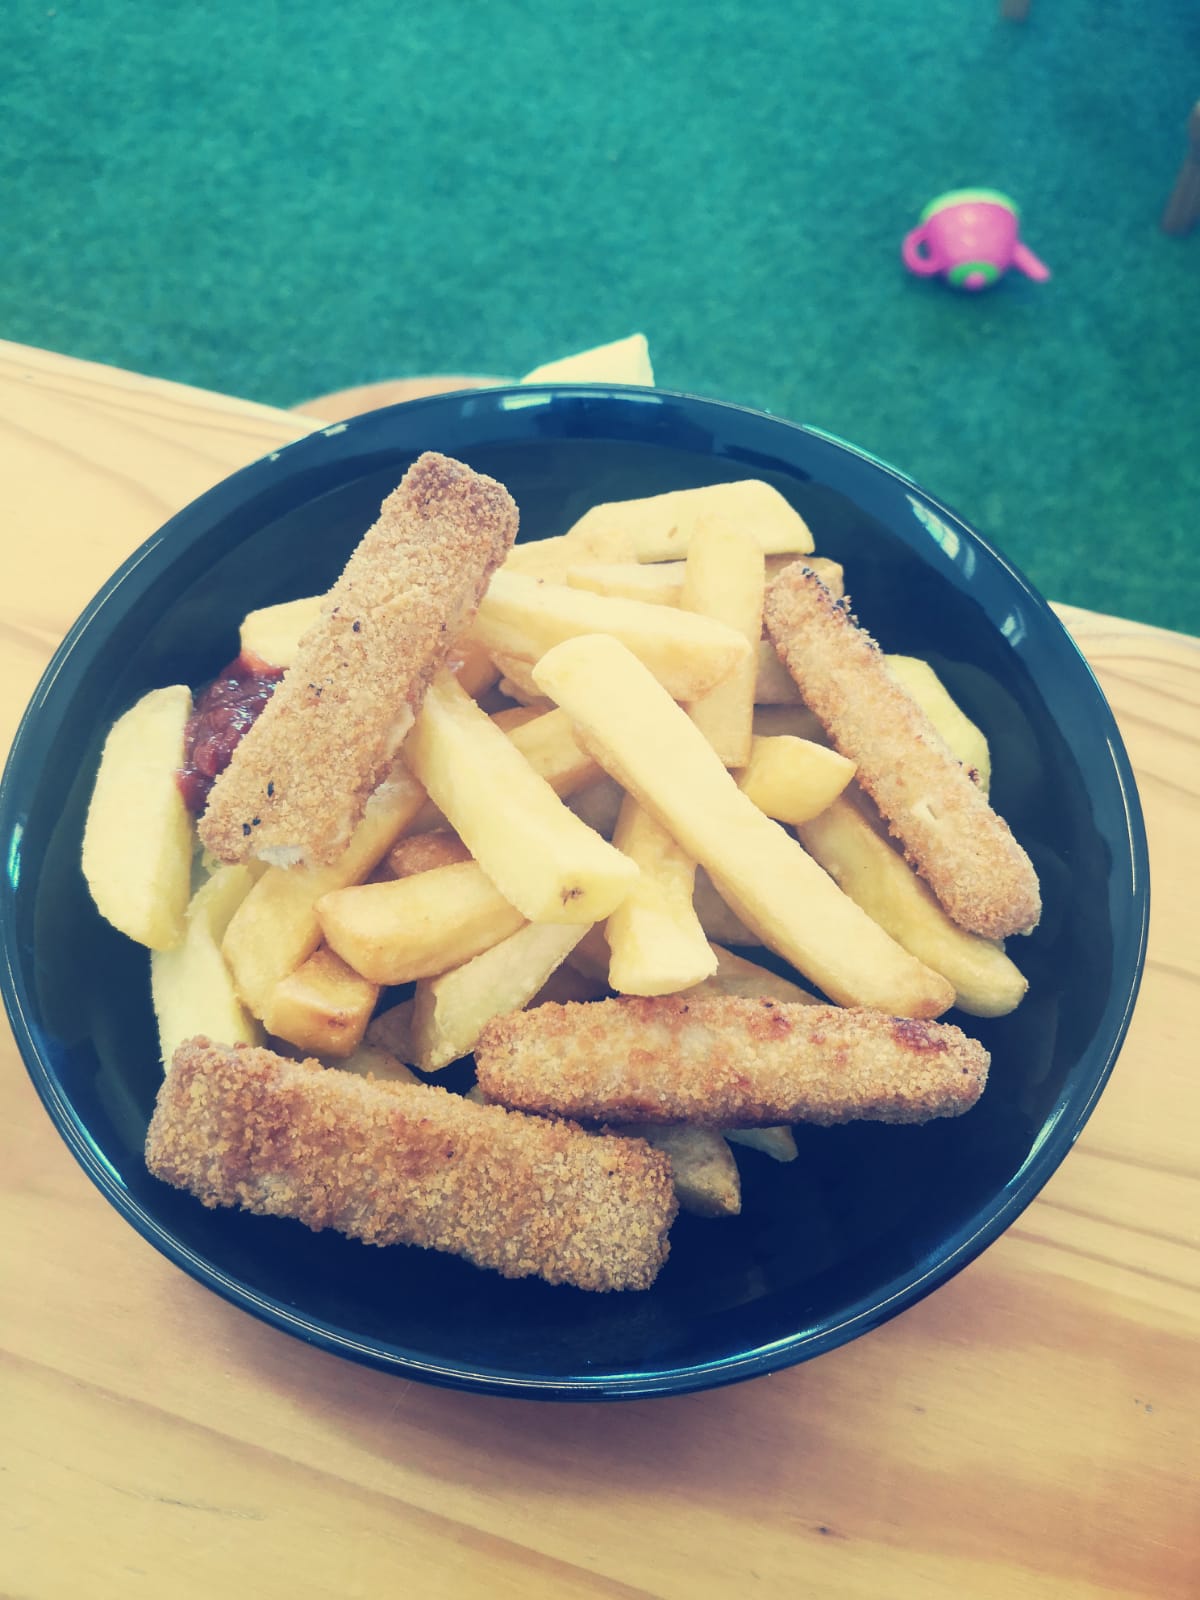 Kids Shack Fish Fingers with fries